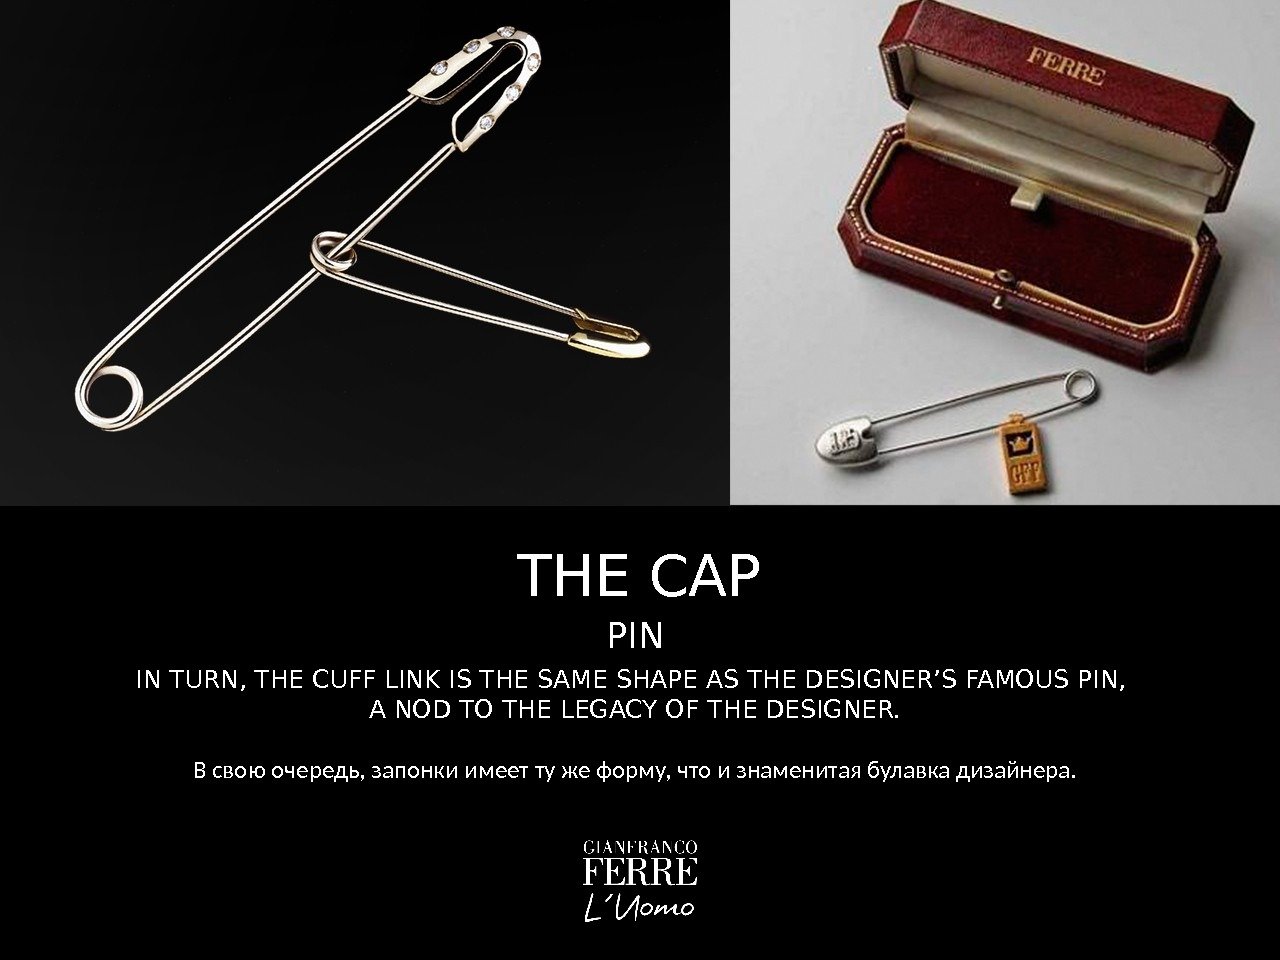 THE CAP IN TURN, THE CUFF LINK IS THE SAME SHAPE AS THE DESIGNER’S